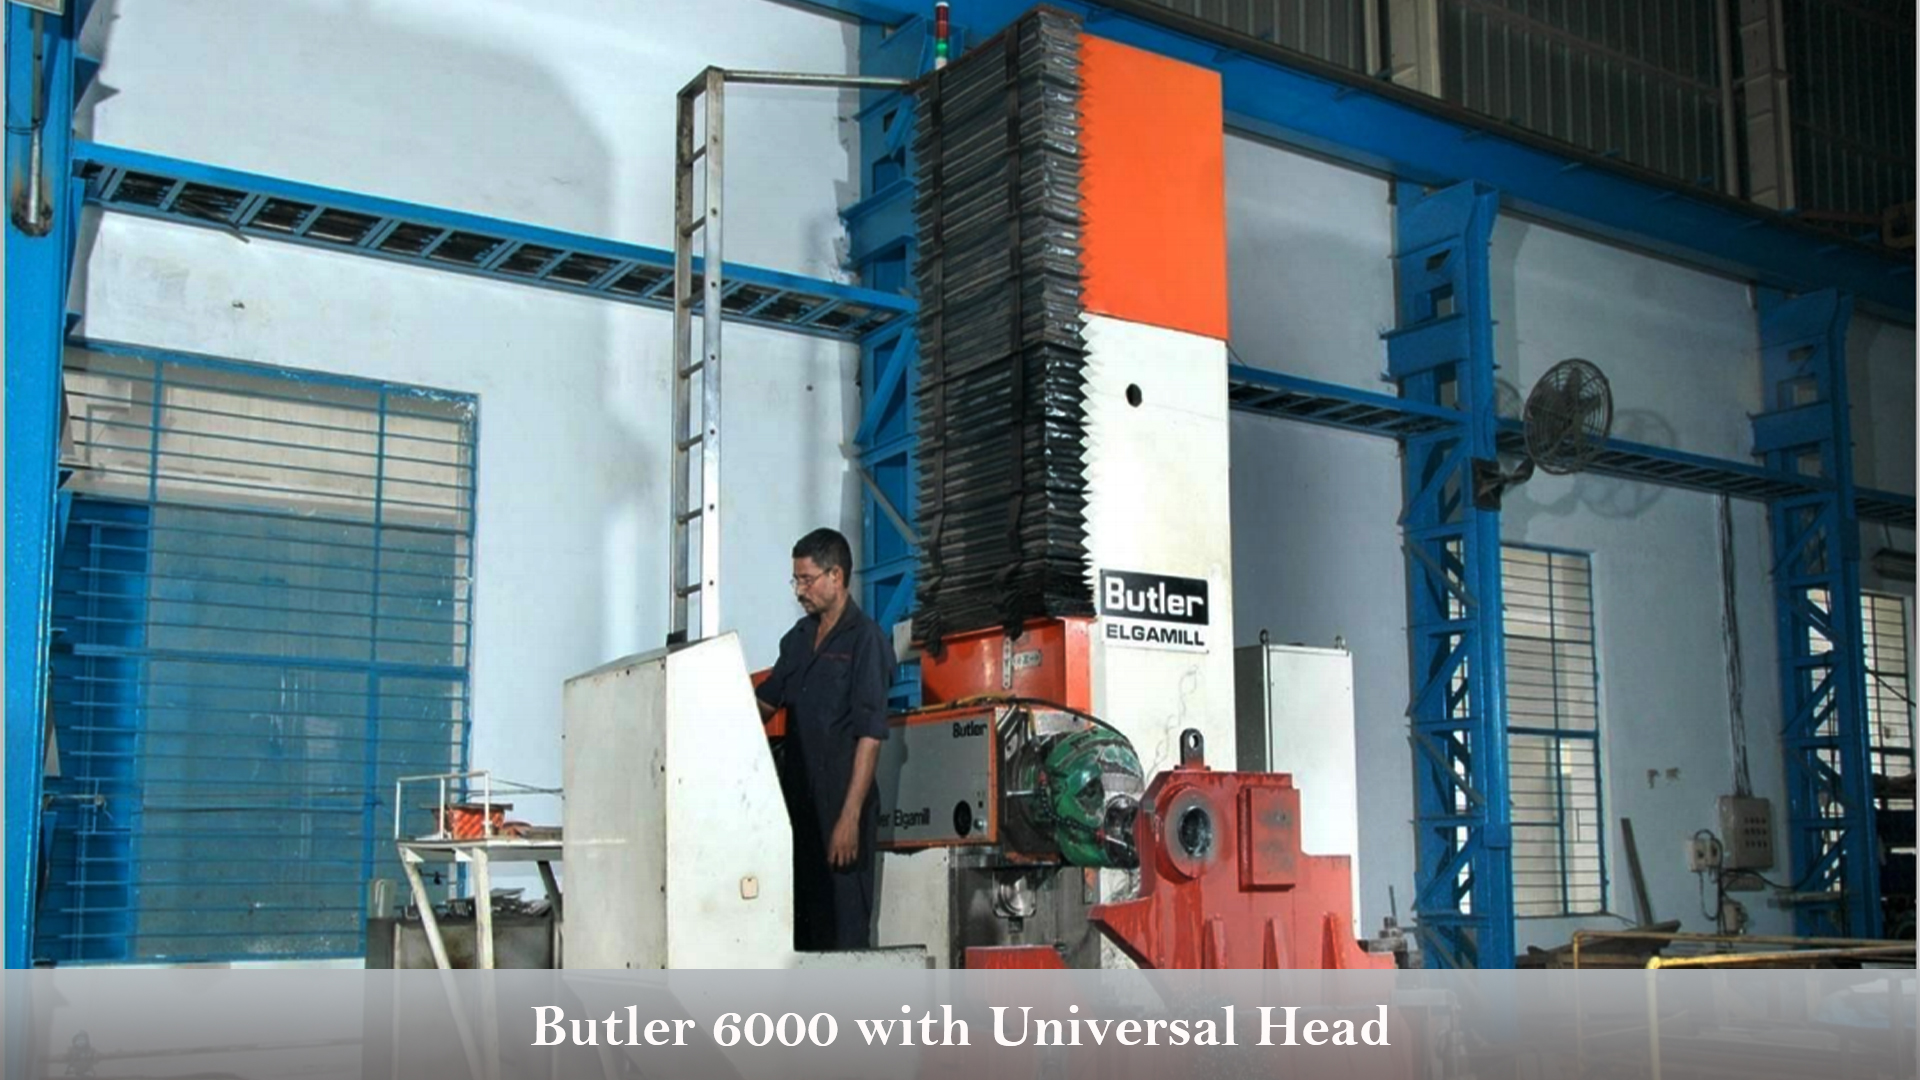 Buttler 6000 with Universal Head